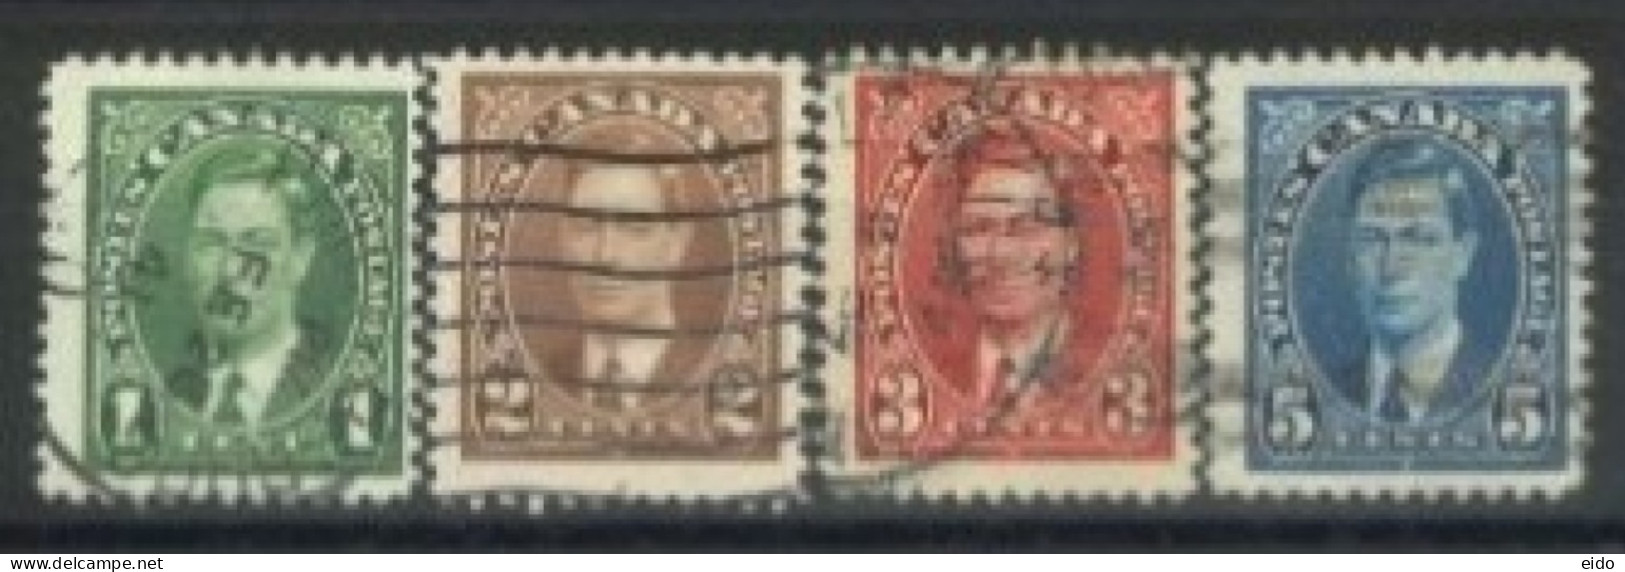 CANADA - 1937, KING GEORGE VI STAMPS SET OF 4, USED. - Used Stamps